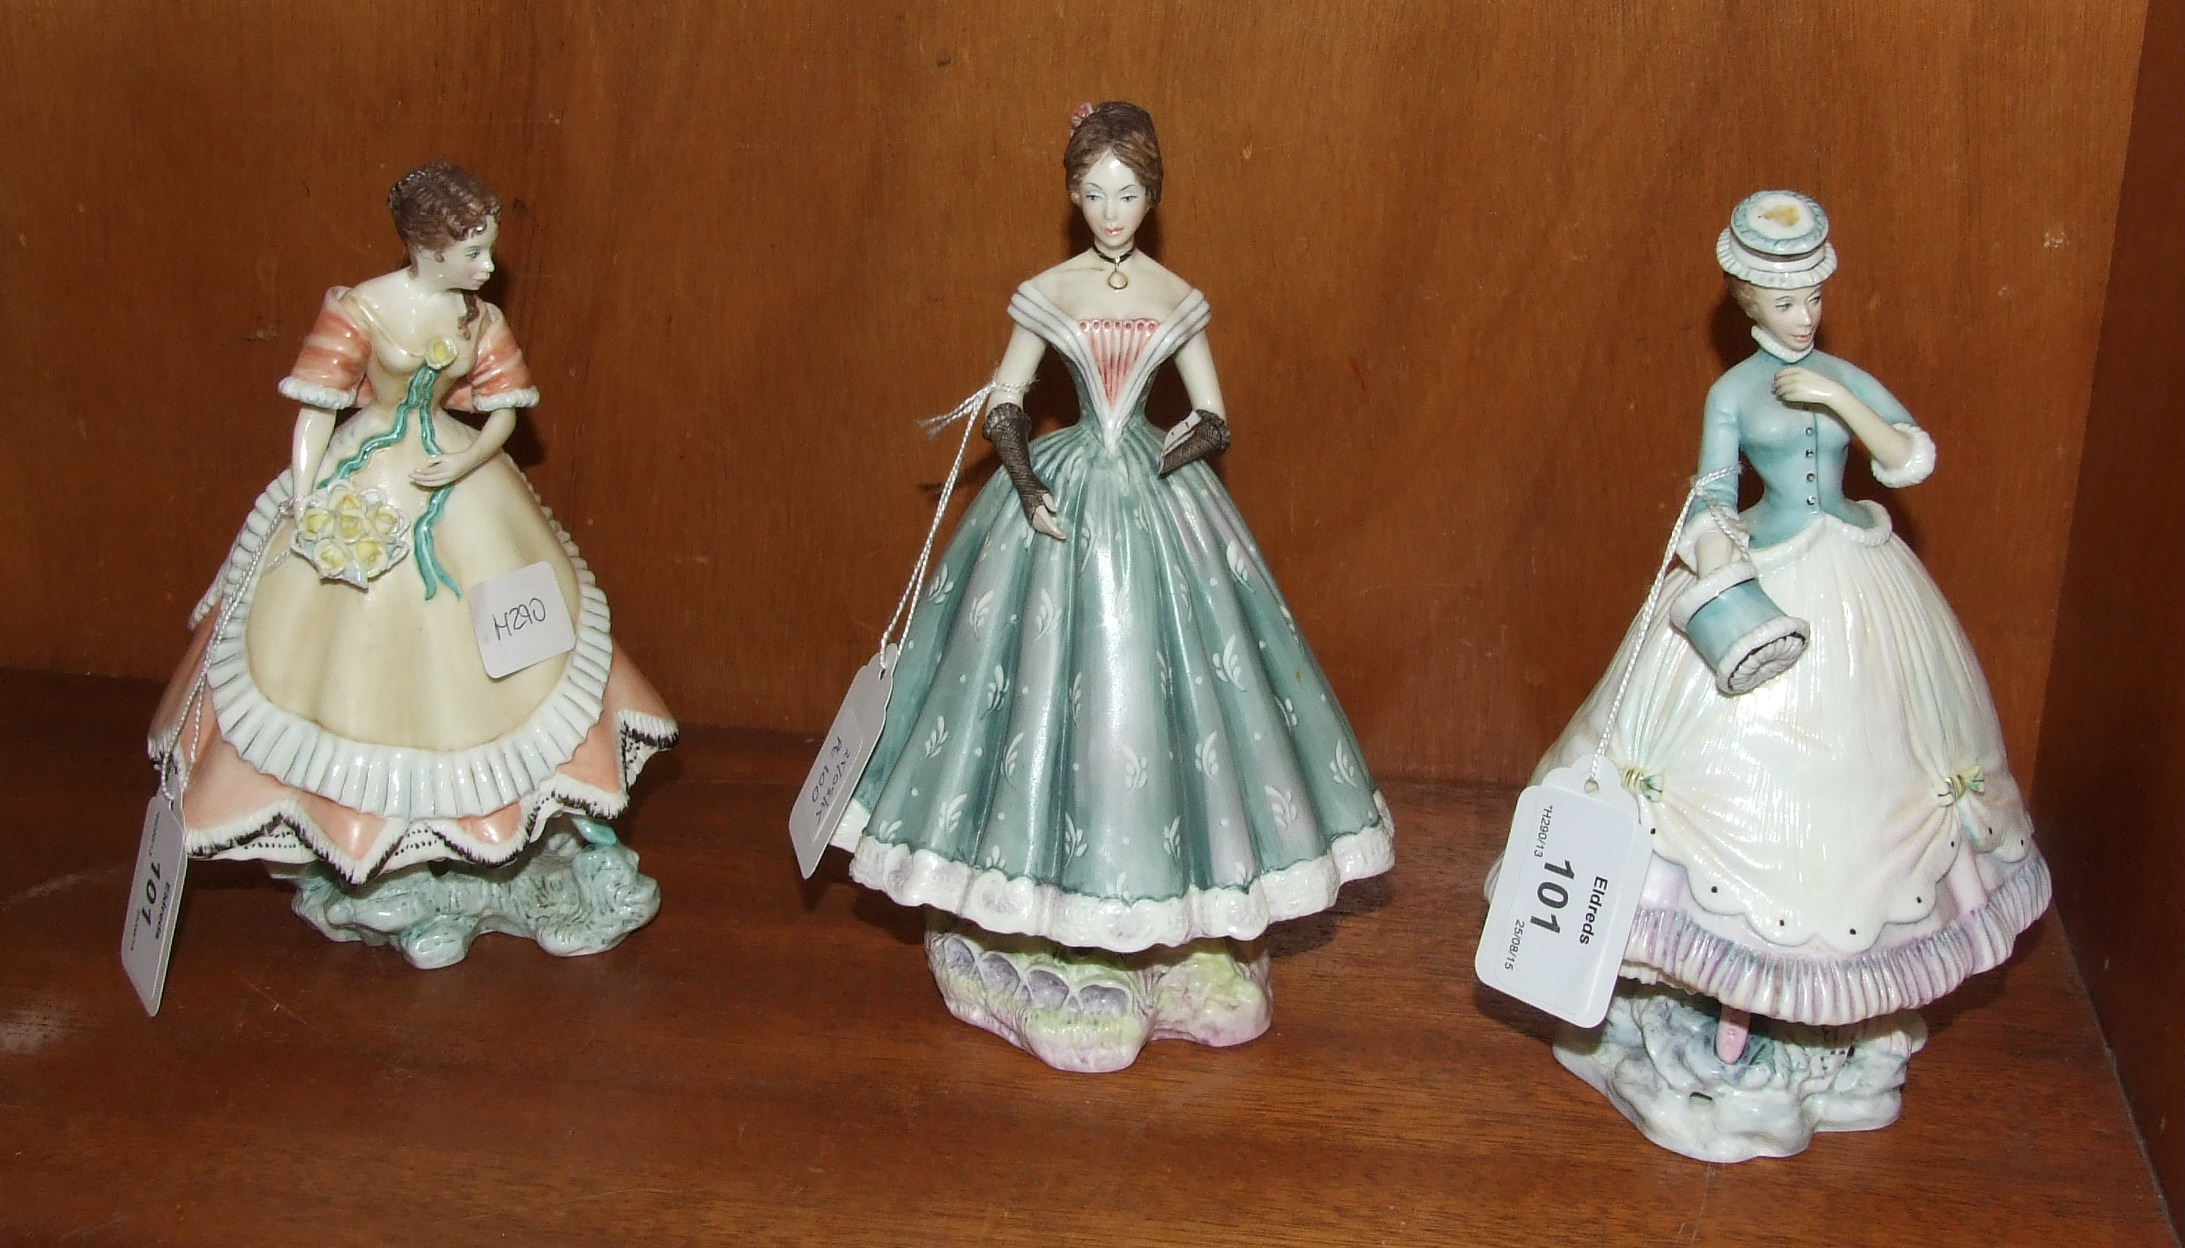 Three Royal Worcester figurines from 'The Victorian Series', 'Lisette', 17cm, 'Caroline', 18.5cm and